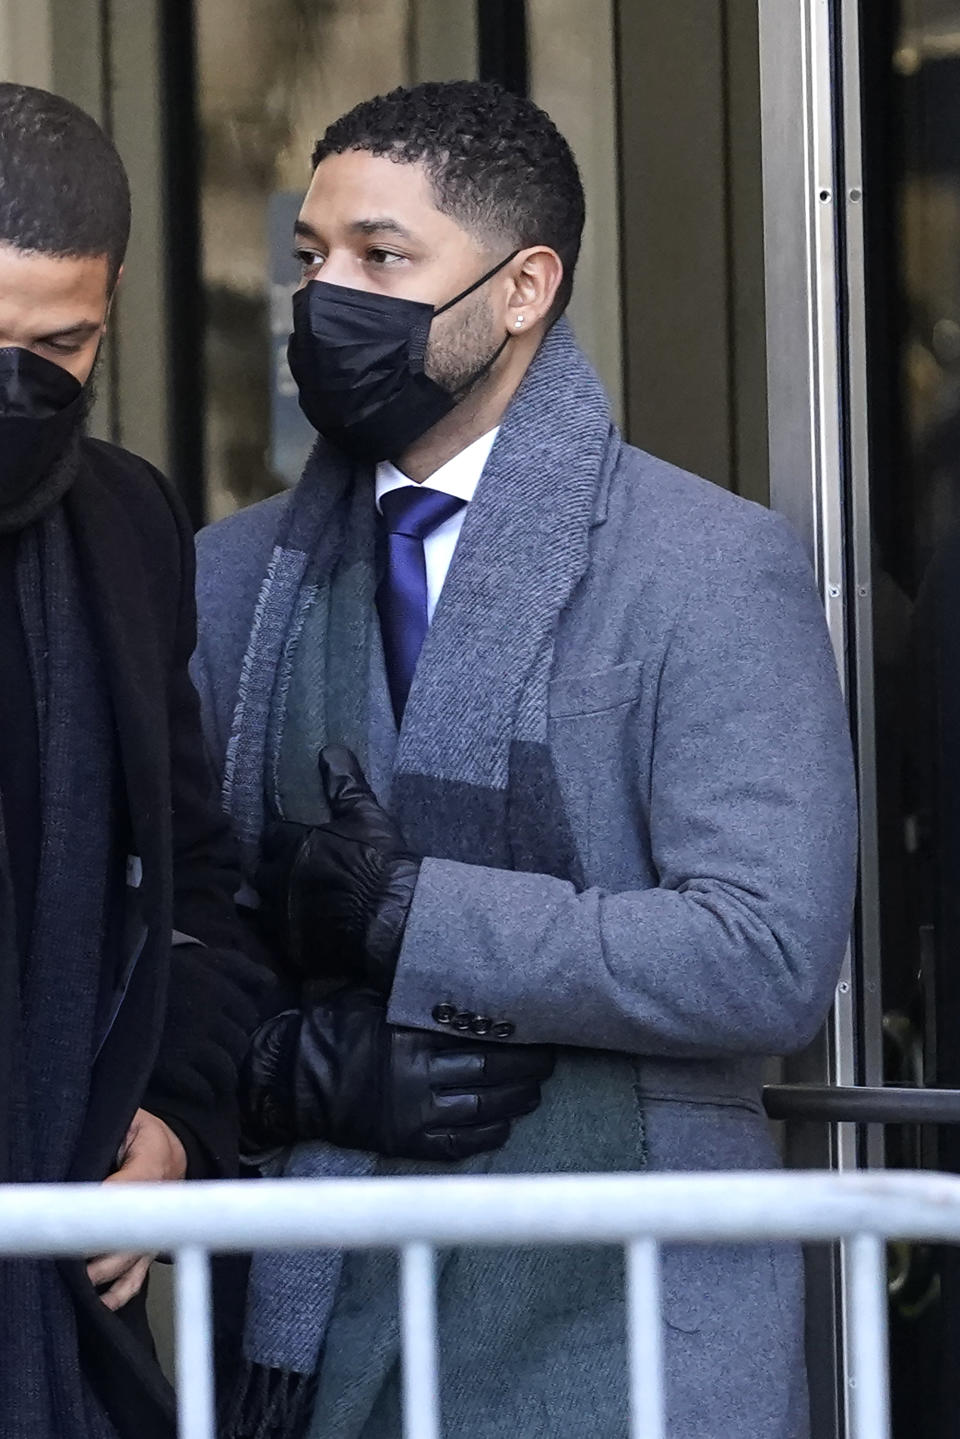 Actor Jussie Smollett departs with his mother Janet, from the Leighton Criminal Courthouse, Wednesday, Dec. 8, 2021, in Chicago, after Cook County Judge James Linn gave the case to jury. (AP Photo/Nam Y. Huh)